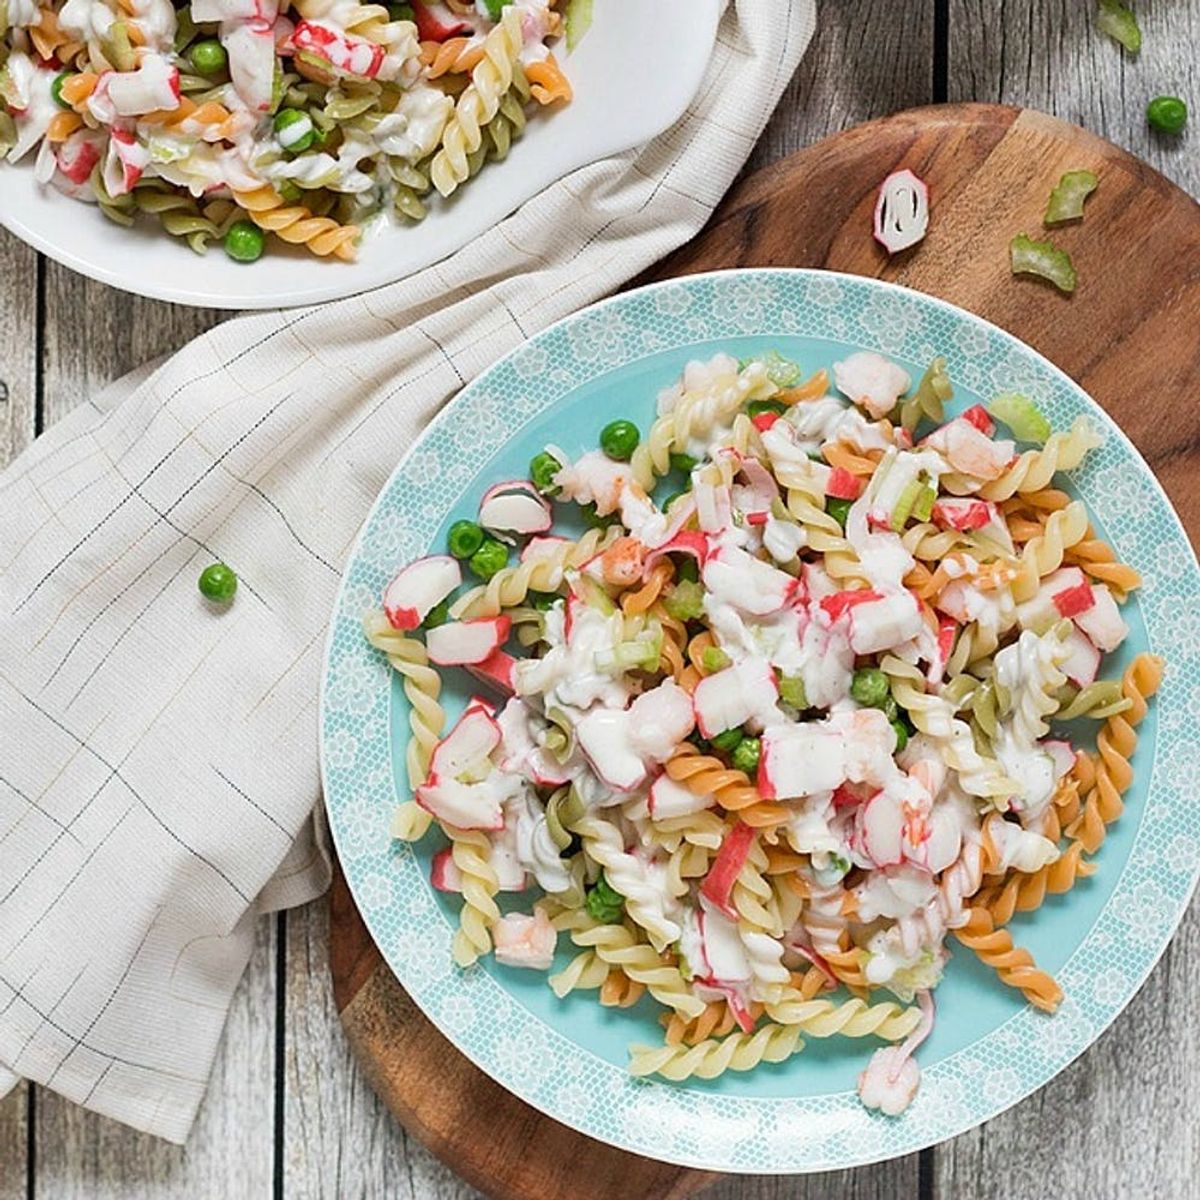 14 Pasta Salad Recipes That Pack a Punch for Lunch